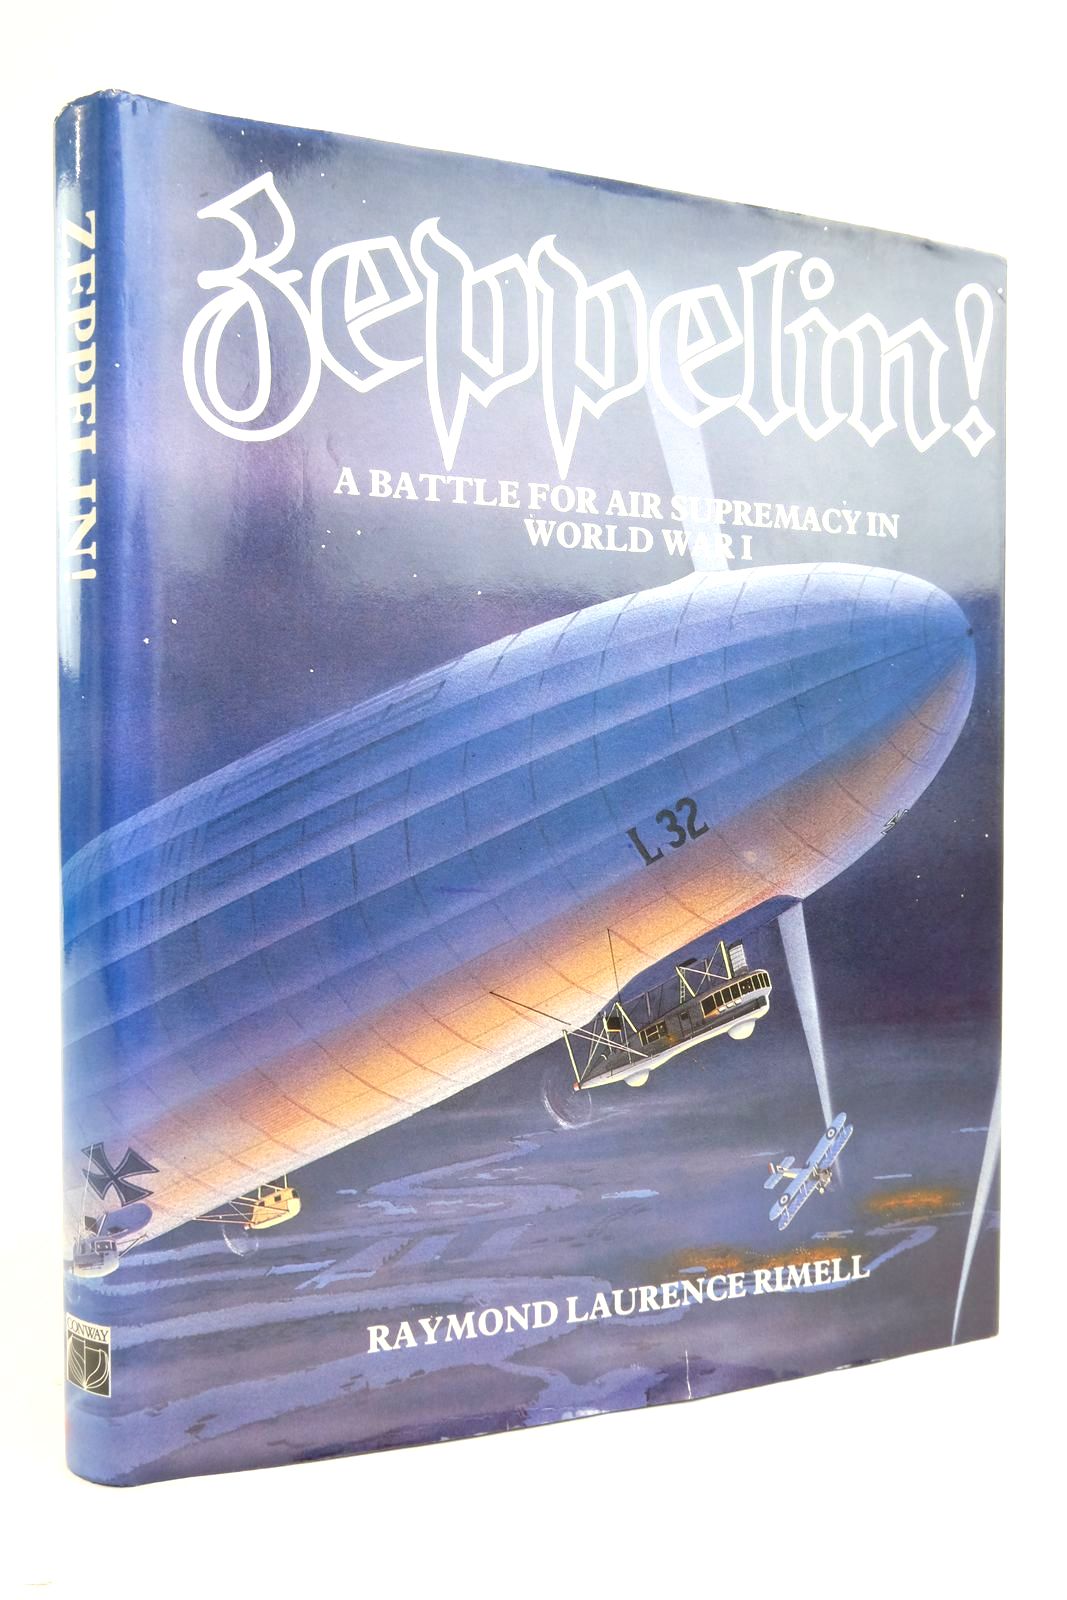 Photo of ZEPPELIN! A BATTLE FOR AIR SUPREMACY IN WORLD WAR I- Stock Number: 2136403